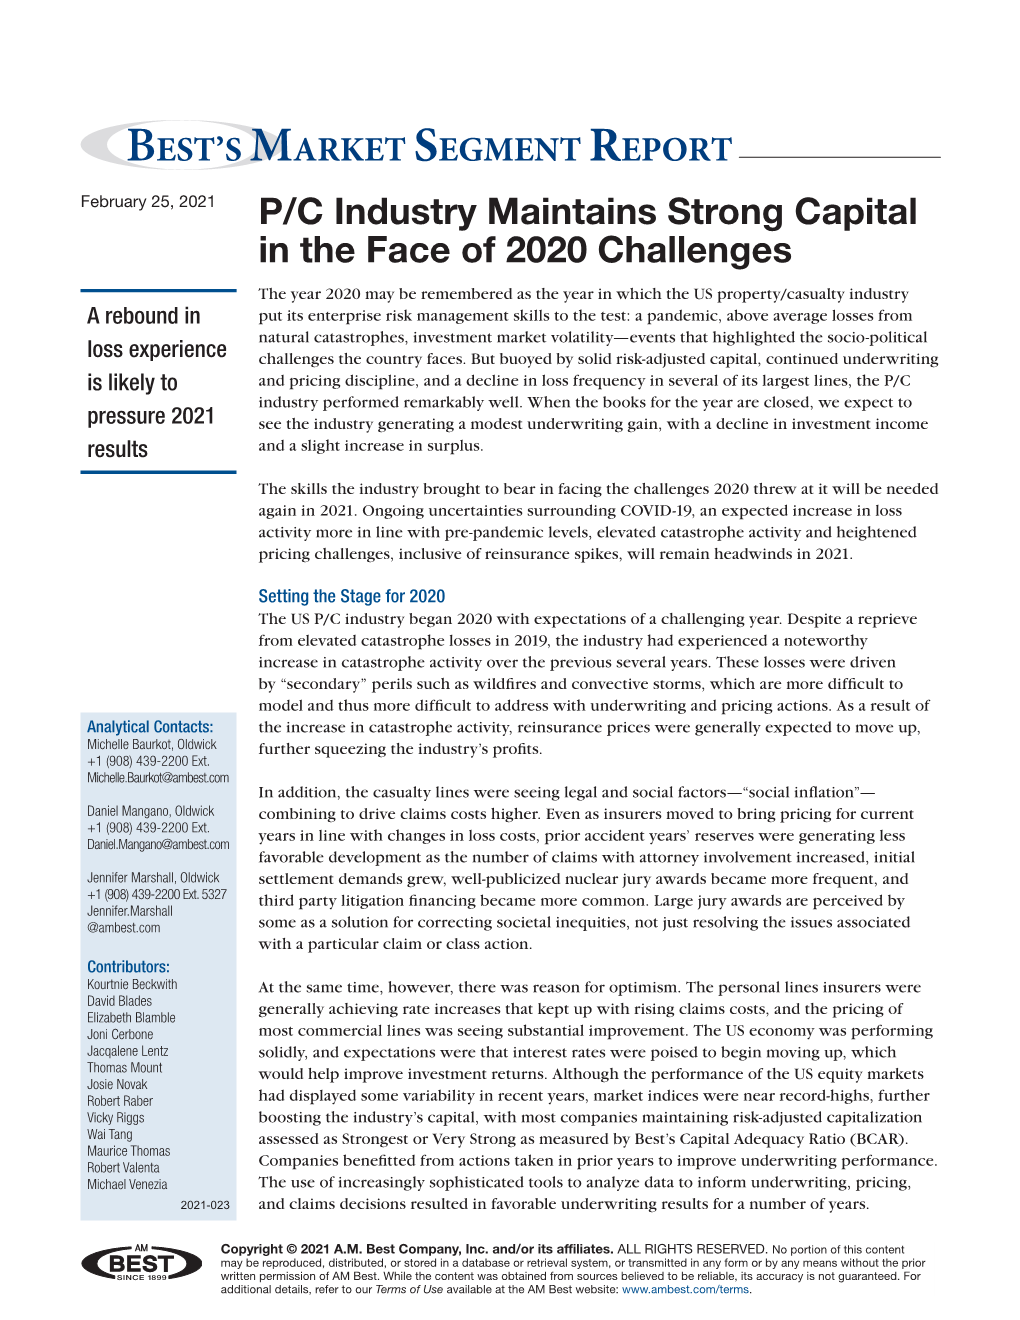 P/C Industry Maintains Strong Capital in the Face of 2020 Challenges